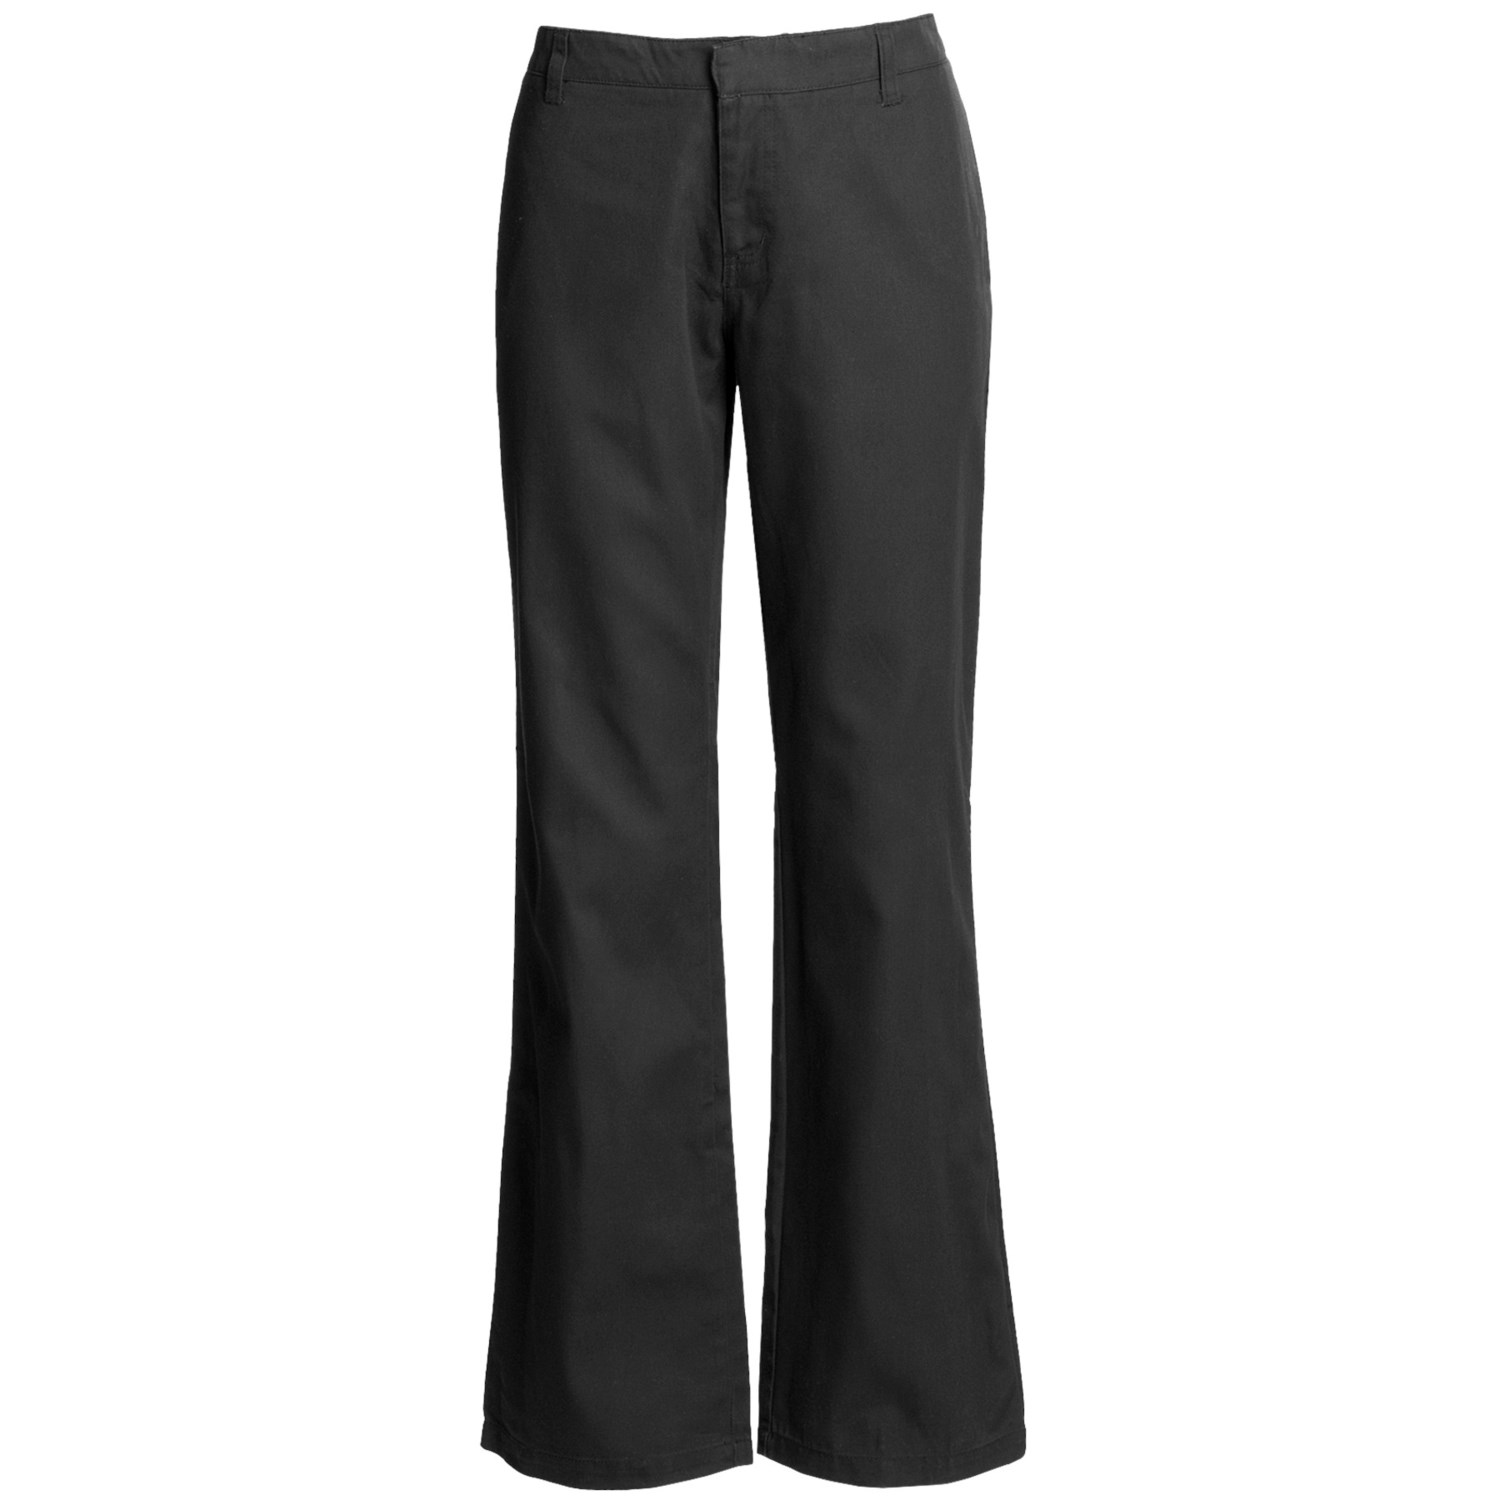 Bootcut Cotton Twill Pants (For Women) 3828W - Save 84%